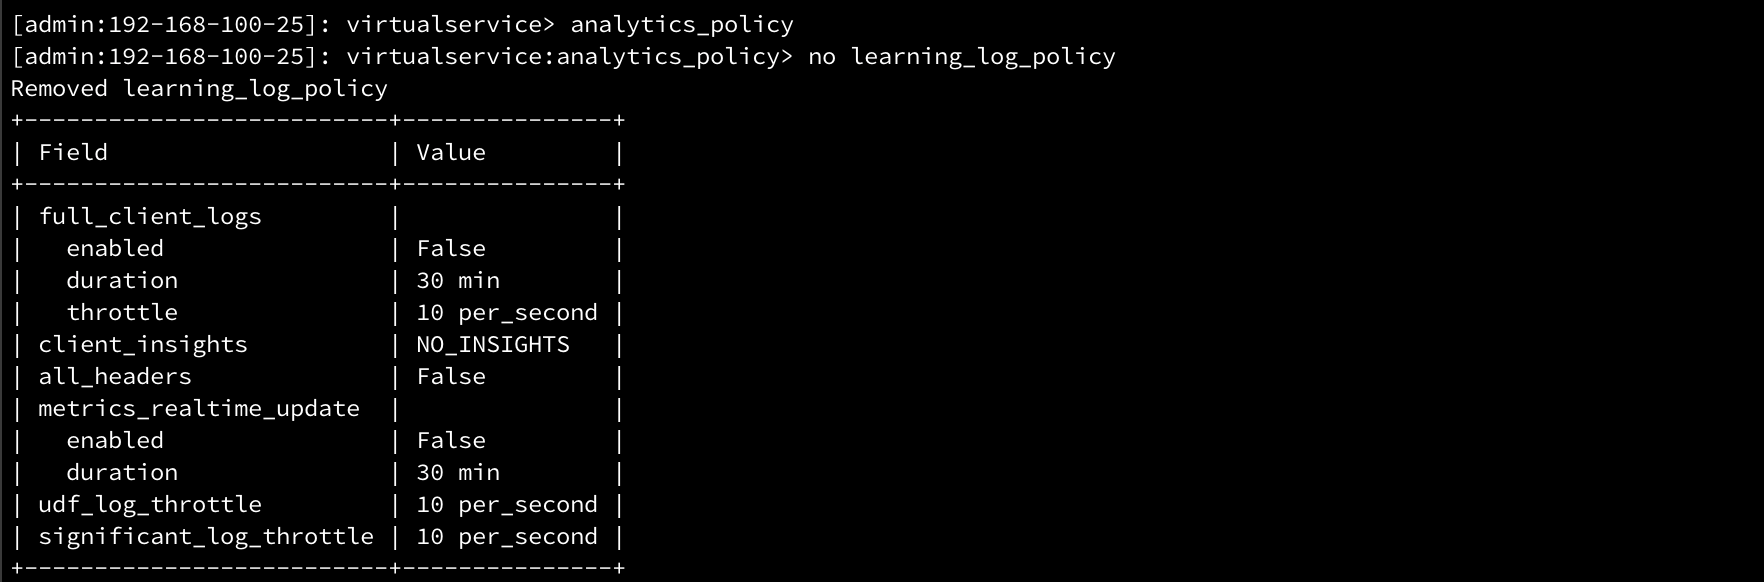 Remove learning log policy